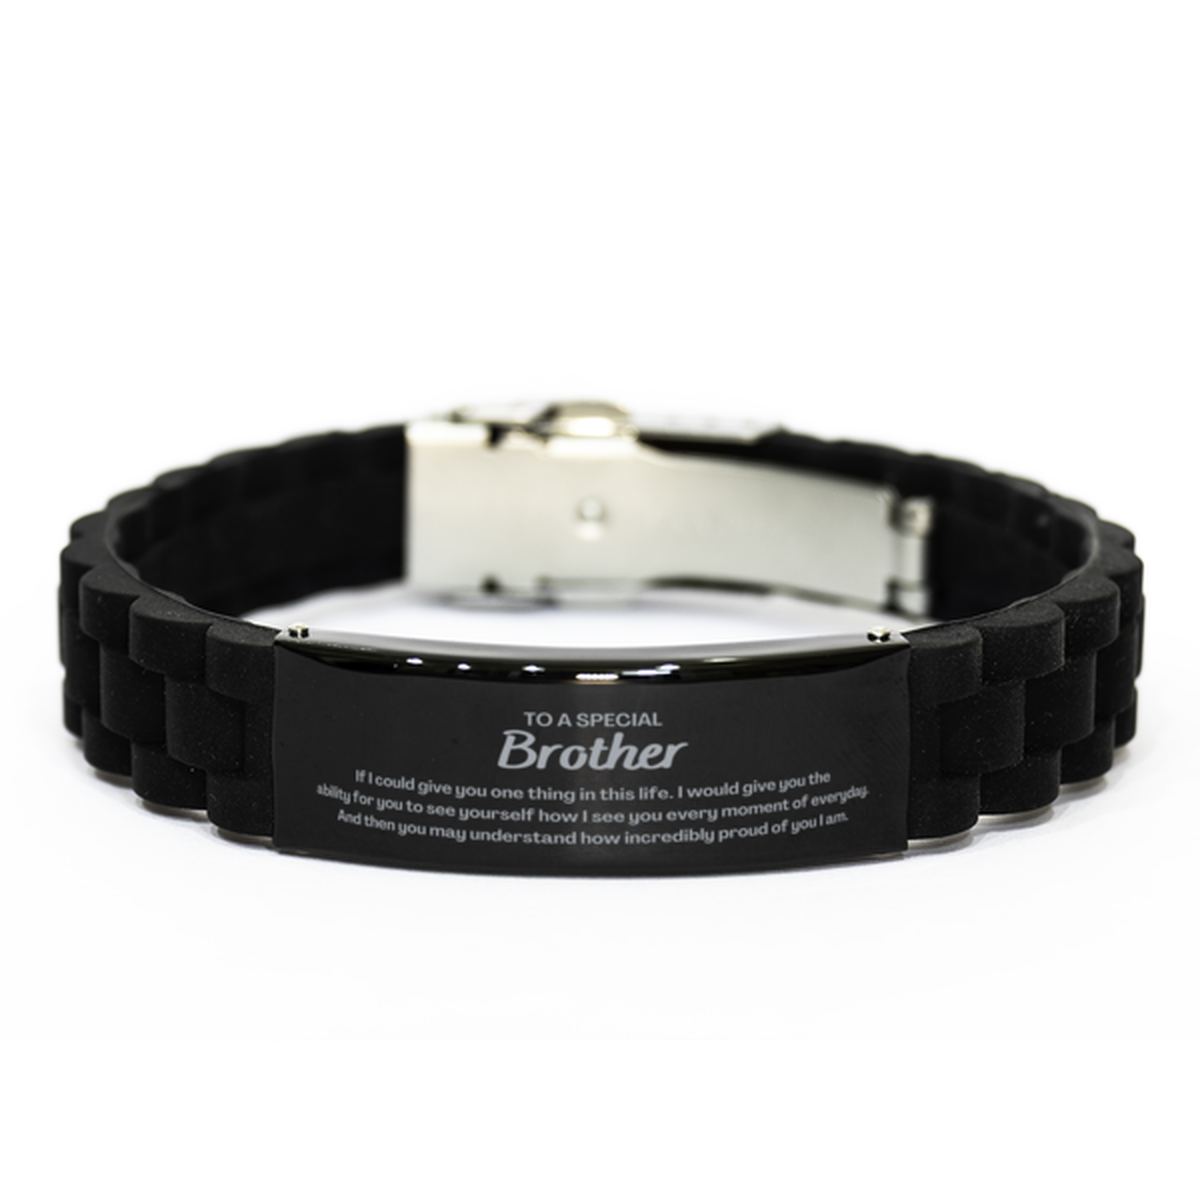 To My Brother Black Glidelock Clasp Bracelet, Gifts For Brother Engraved, Inspirational Gifts for Christmas Birthday, Epic Gifts for Brother To A Special Brother how incredibly proud of you I am